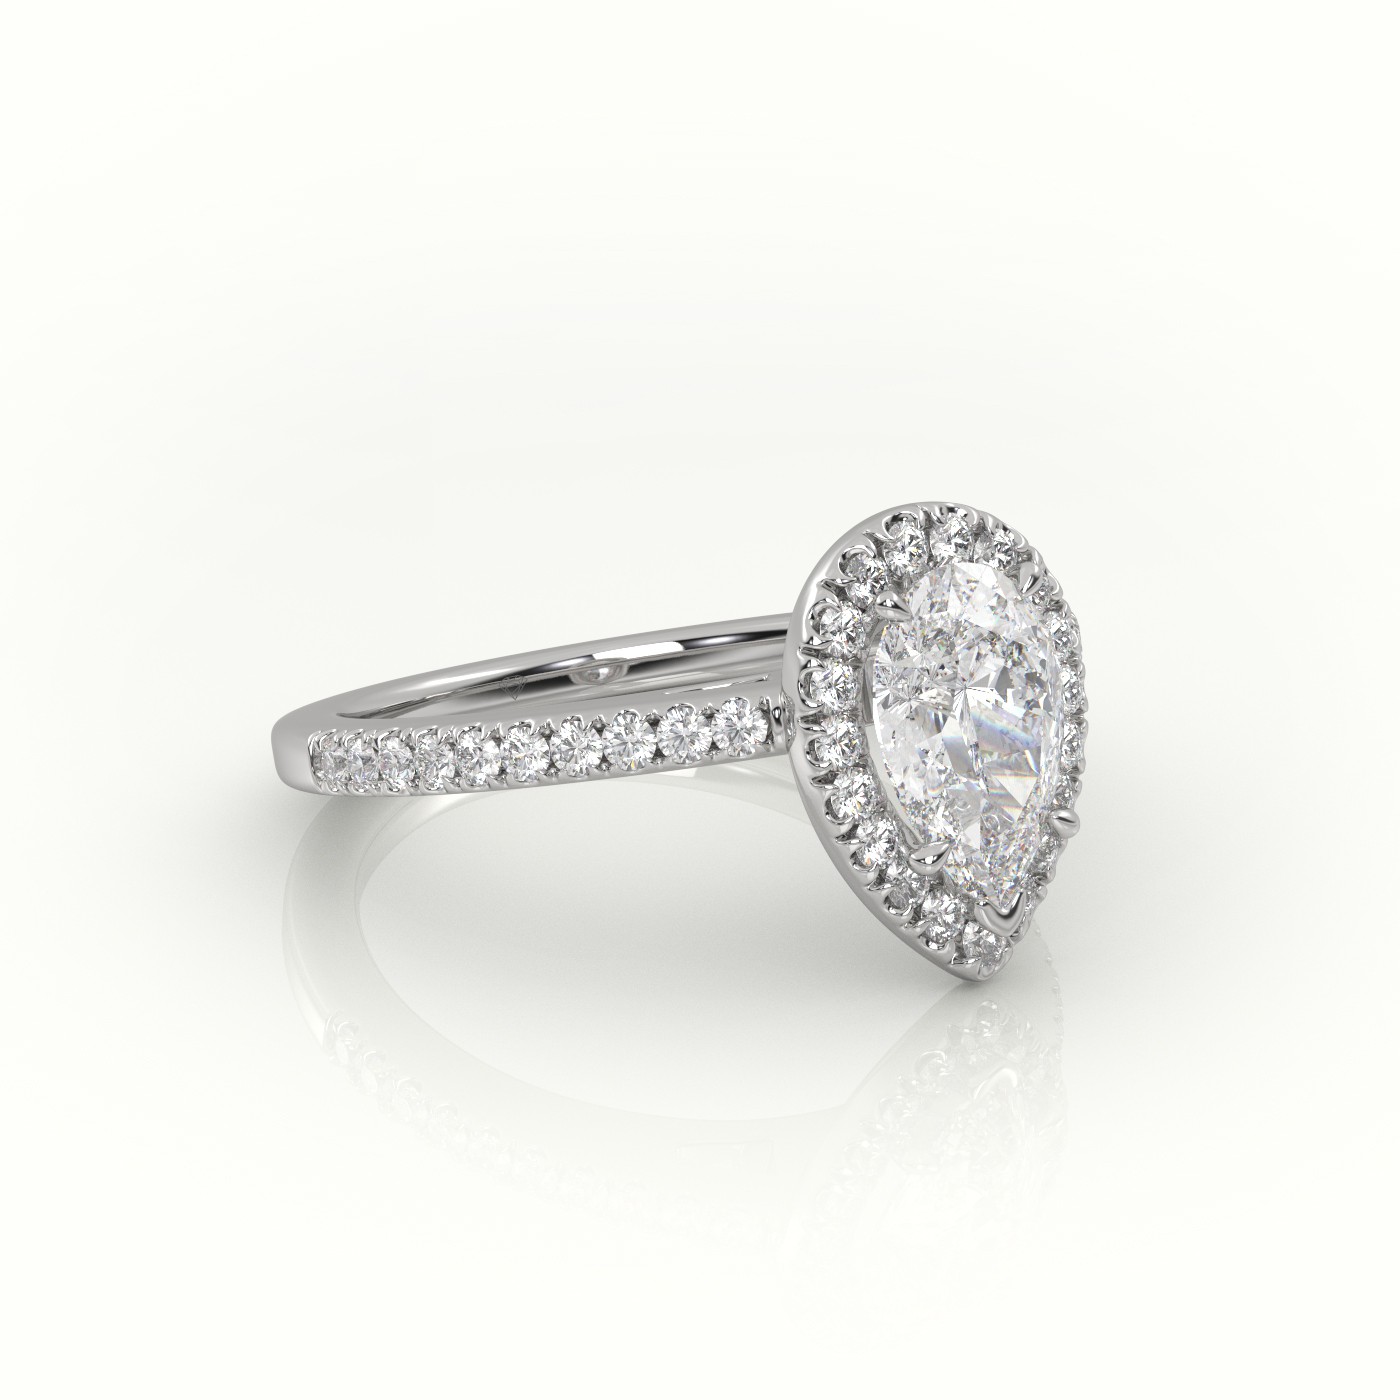 18K WHITE GOLD PEAR CUT DIAMOND HALO PAVE SETTING ENGAGEMENT RING